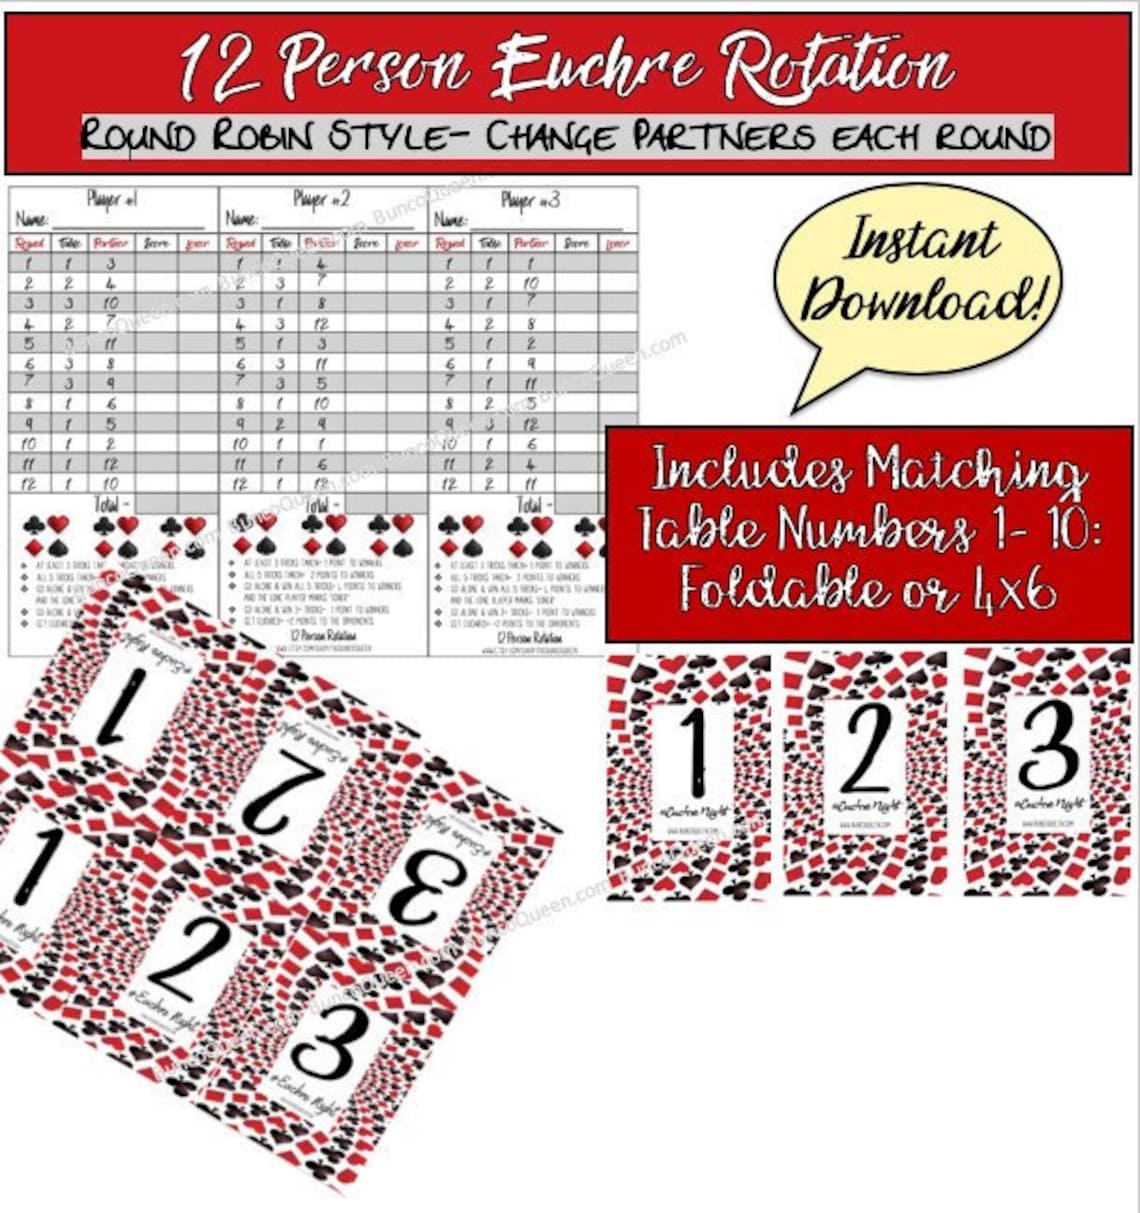 buy-12-person-euchre-rotation-score-sheet-euchre-tally-w-table-online